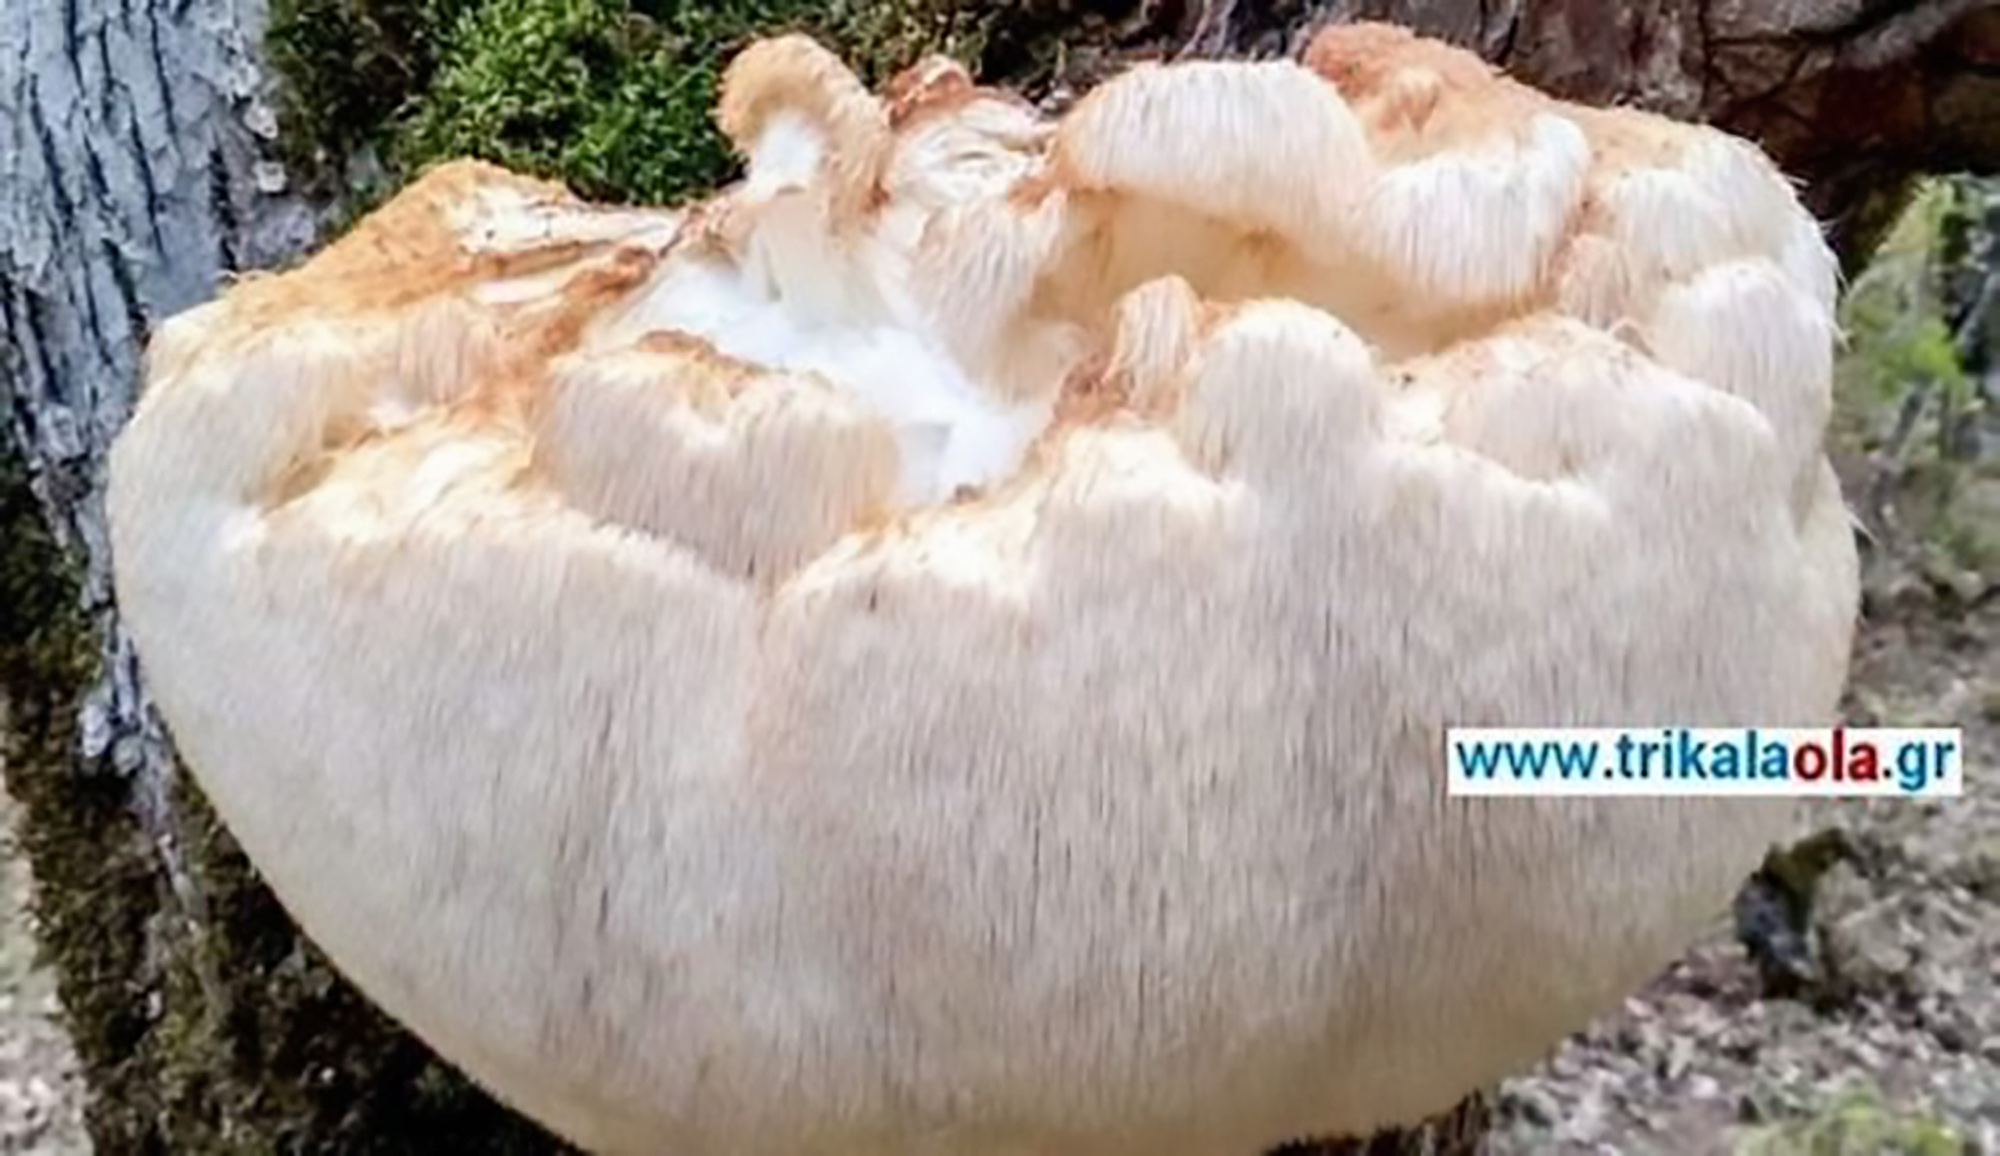 Read more about the article Hungry Pals Find And Cook Up Giant Mushroom